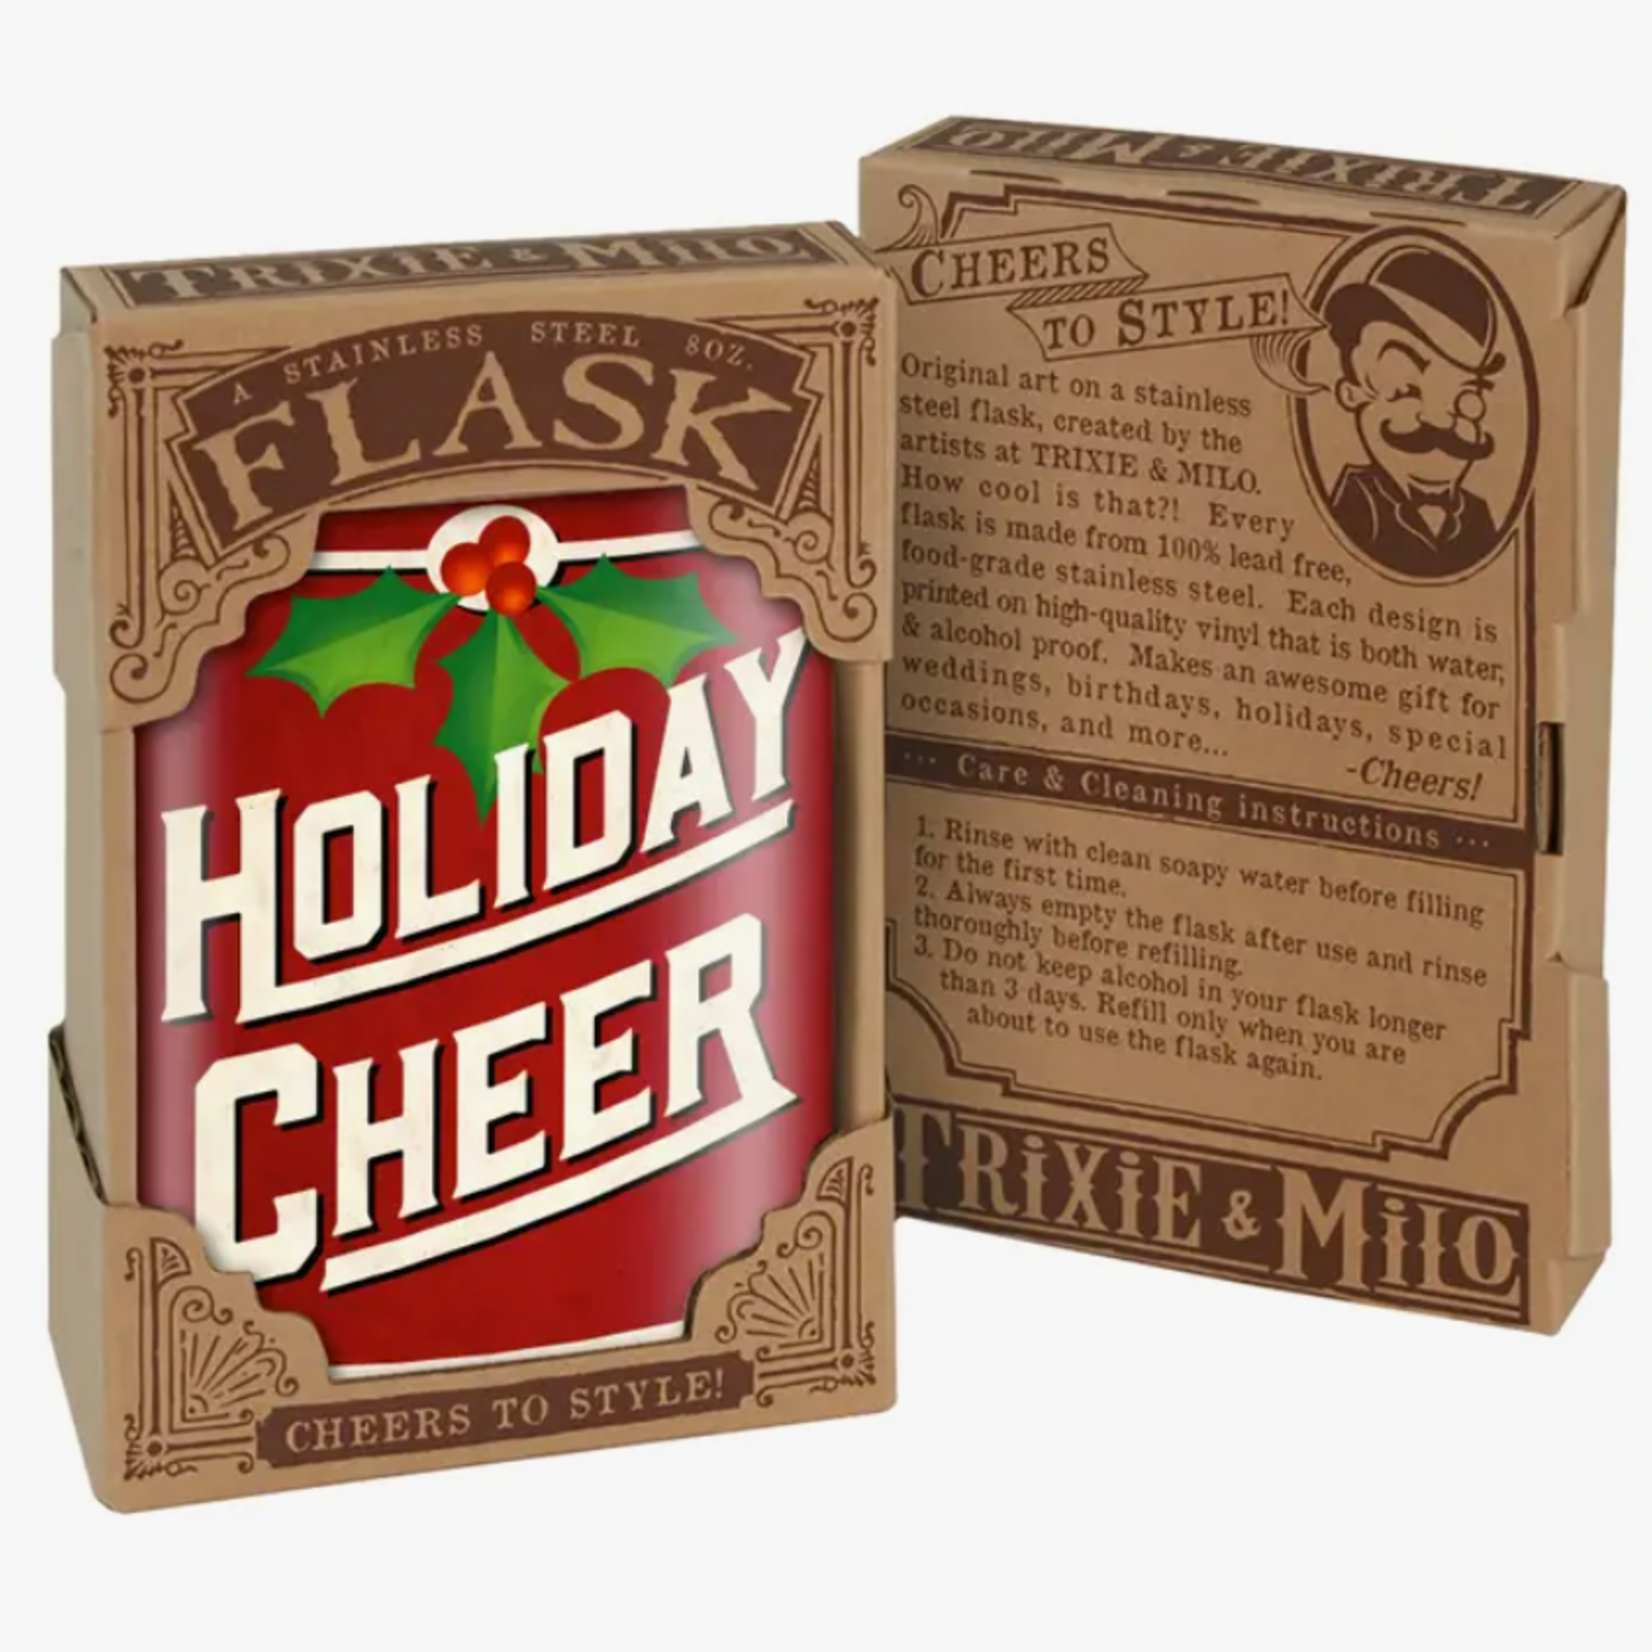 trixie & milo Holiday Cheer Flask